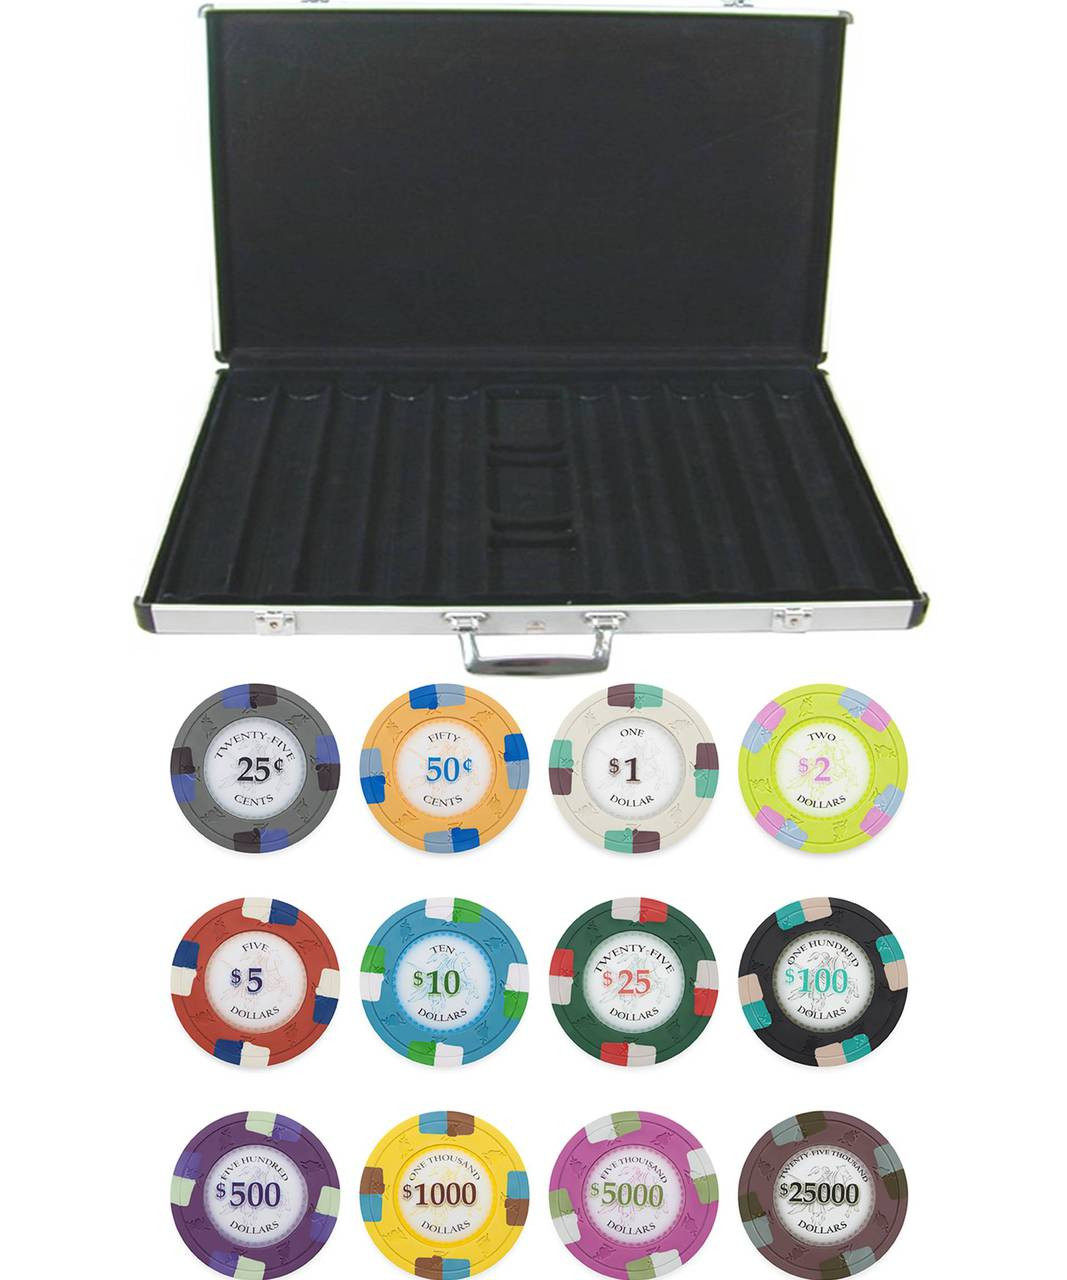 Poker Knights 13 5gm 1000 Chip Clay Poker Set With Aluminum Case Choose Chips Buy Poker Direct